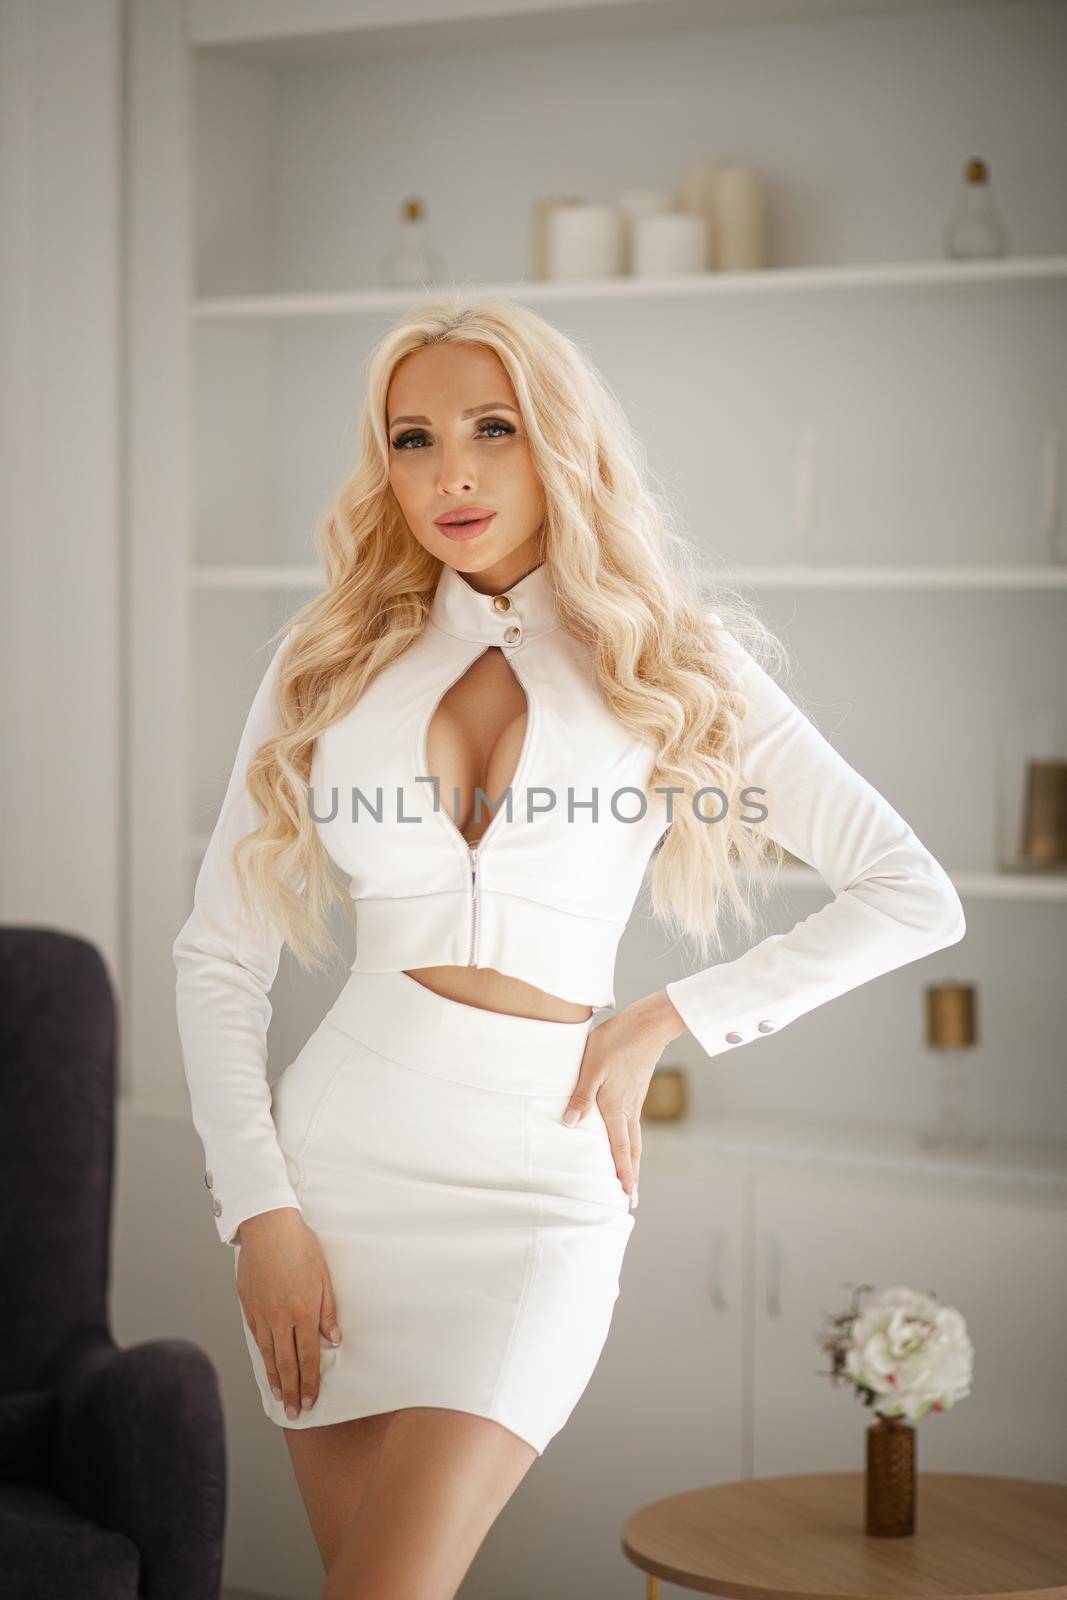 A very beautiful blonde woman in a white fashionable stylish suit in the studio. A charming woman looks and poses for the camera